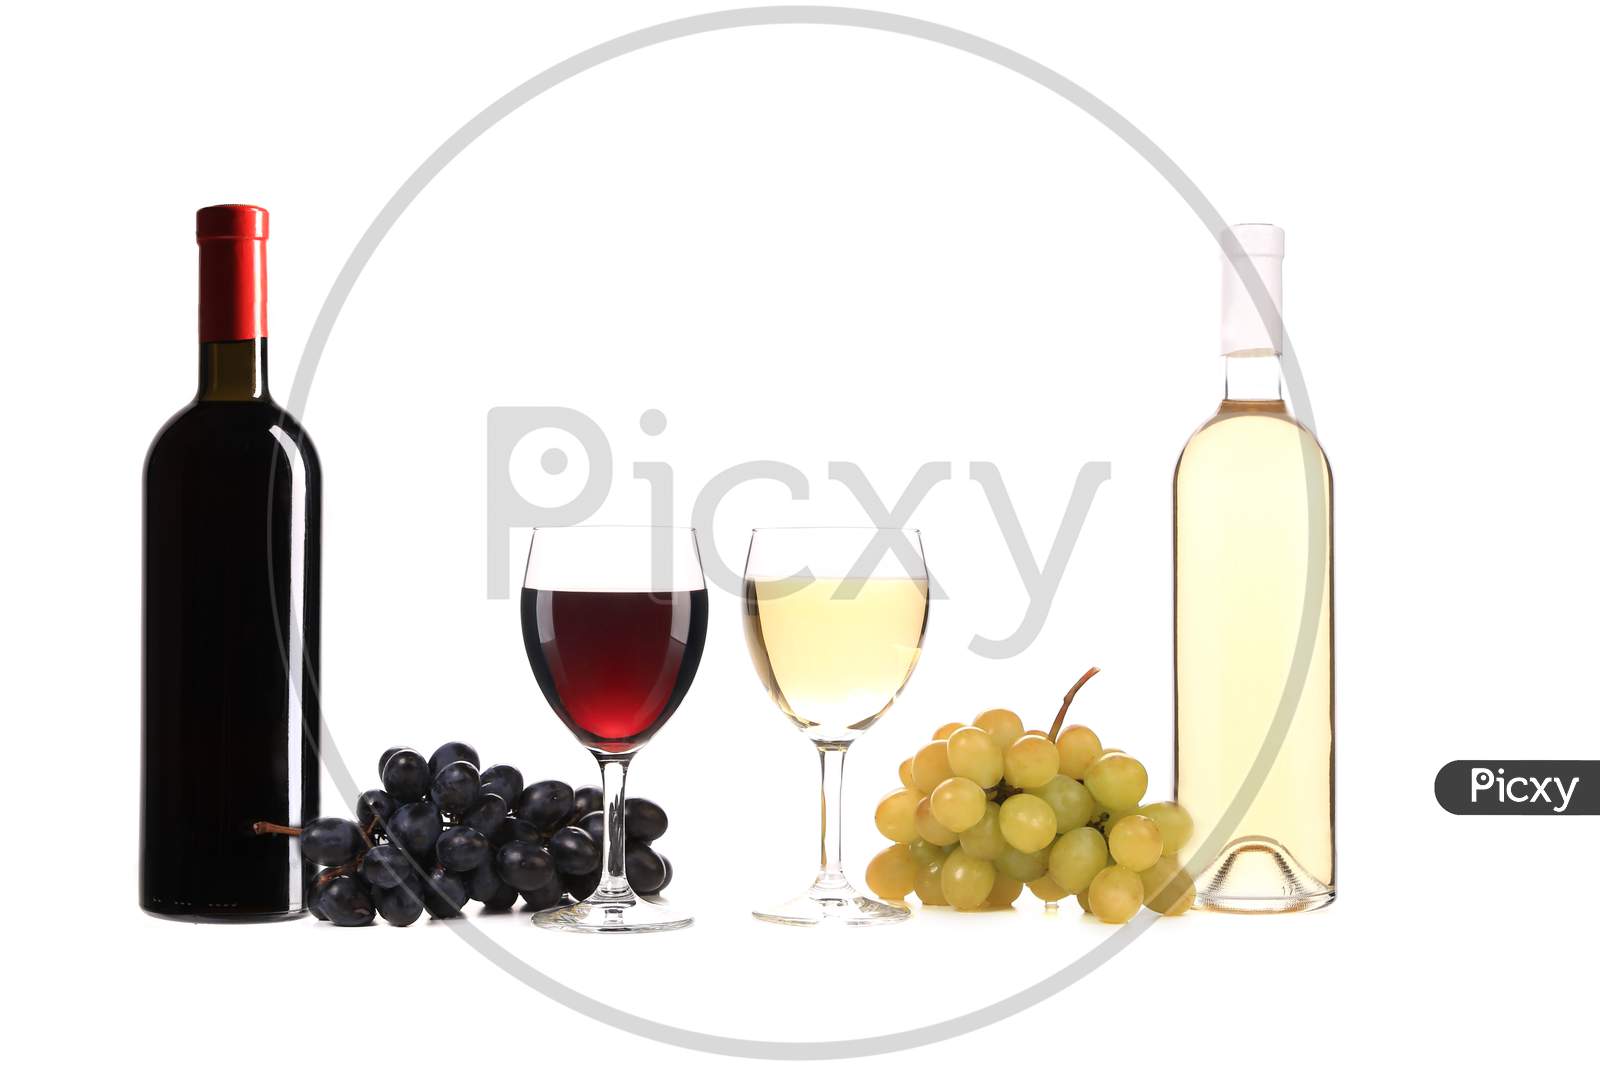 Composition Of Wine Bottle And Glass. Isolated On A White Background.